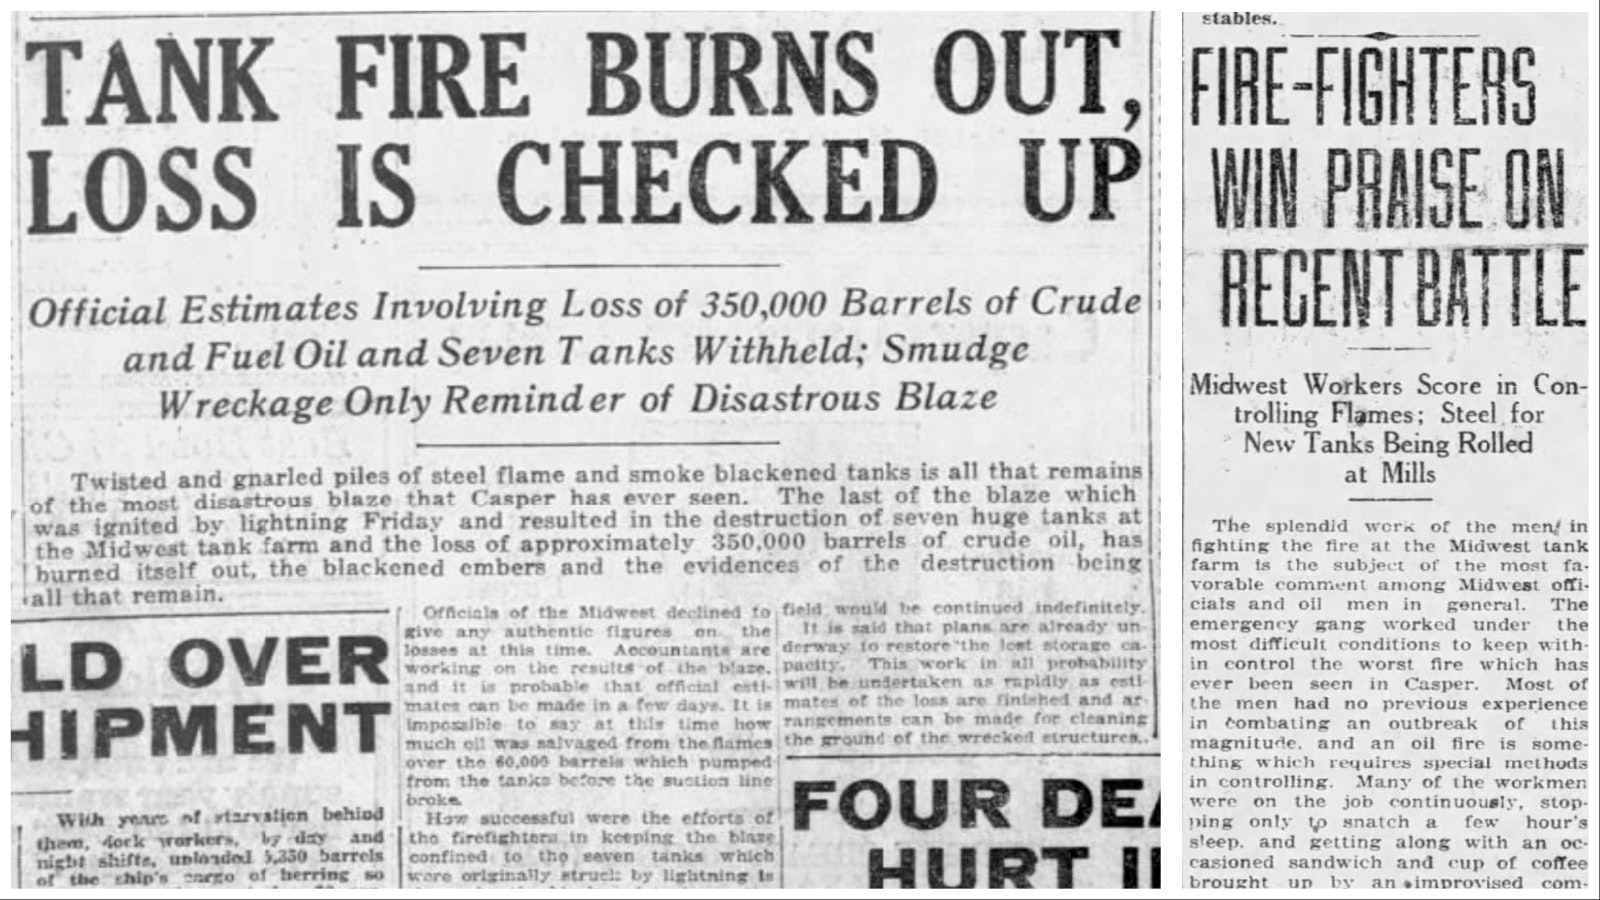 Left: On June 20, 1921 the oil fire that started three days earlier had burned itself out as reported in the Casper Daily Tribune. Right: The refinery workers involved in fighting the blaze were praised for their efforts in the Casper Daily Tribune.